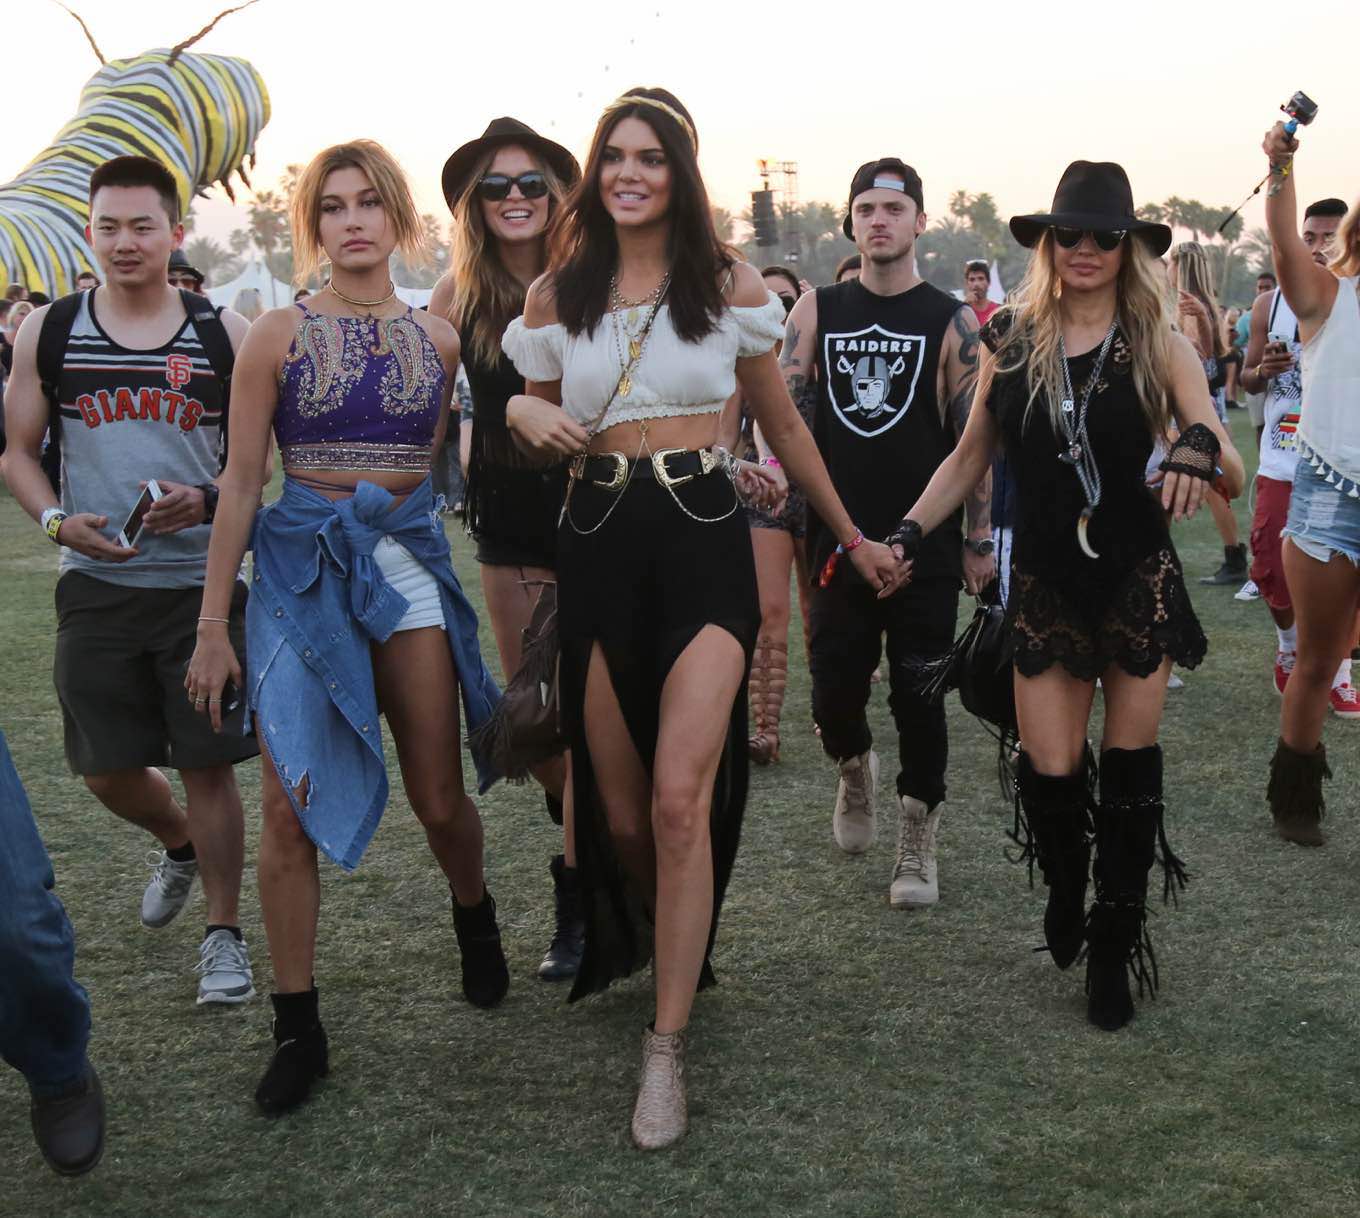 Rave outfits 2015  Rave outfits, Rave girls, Music festival outfits